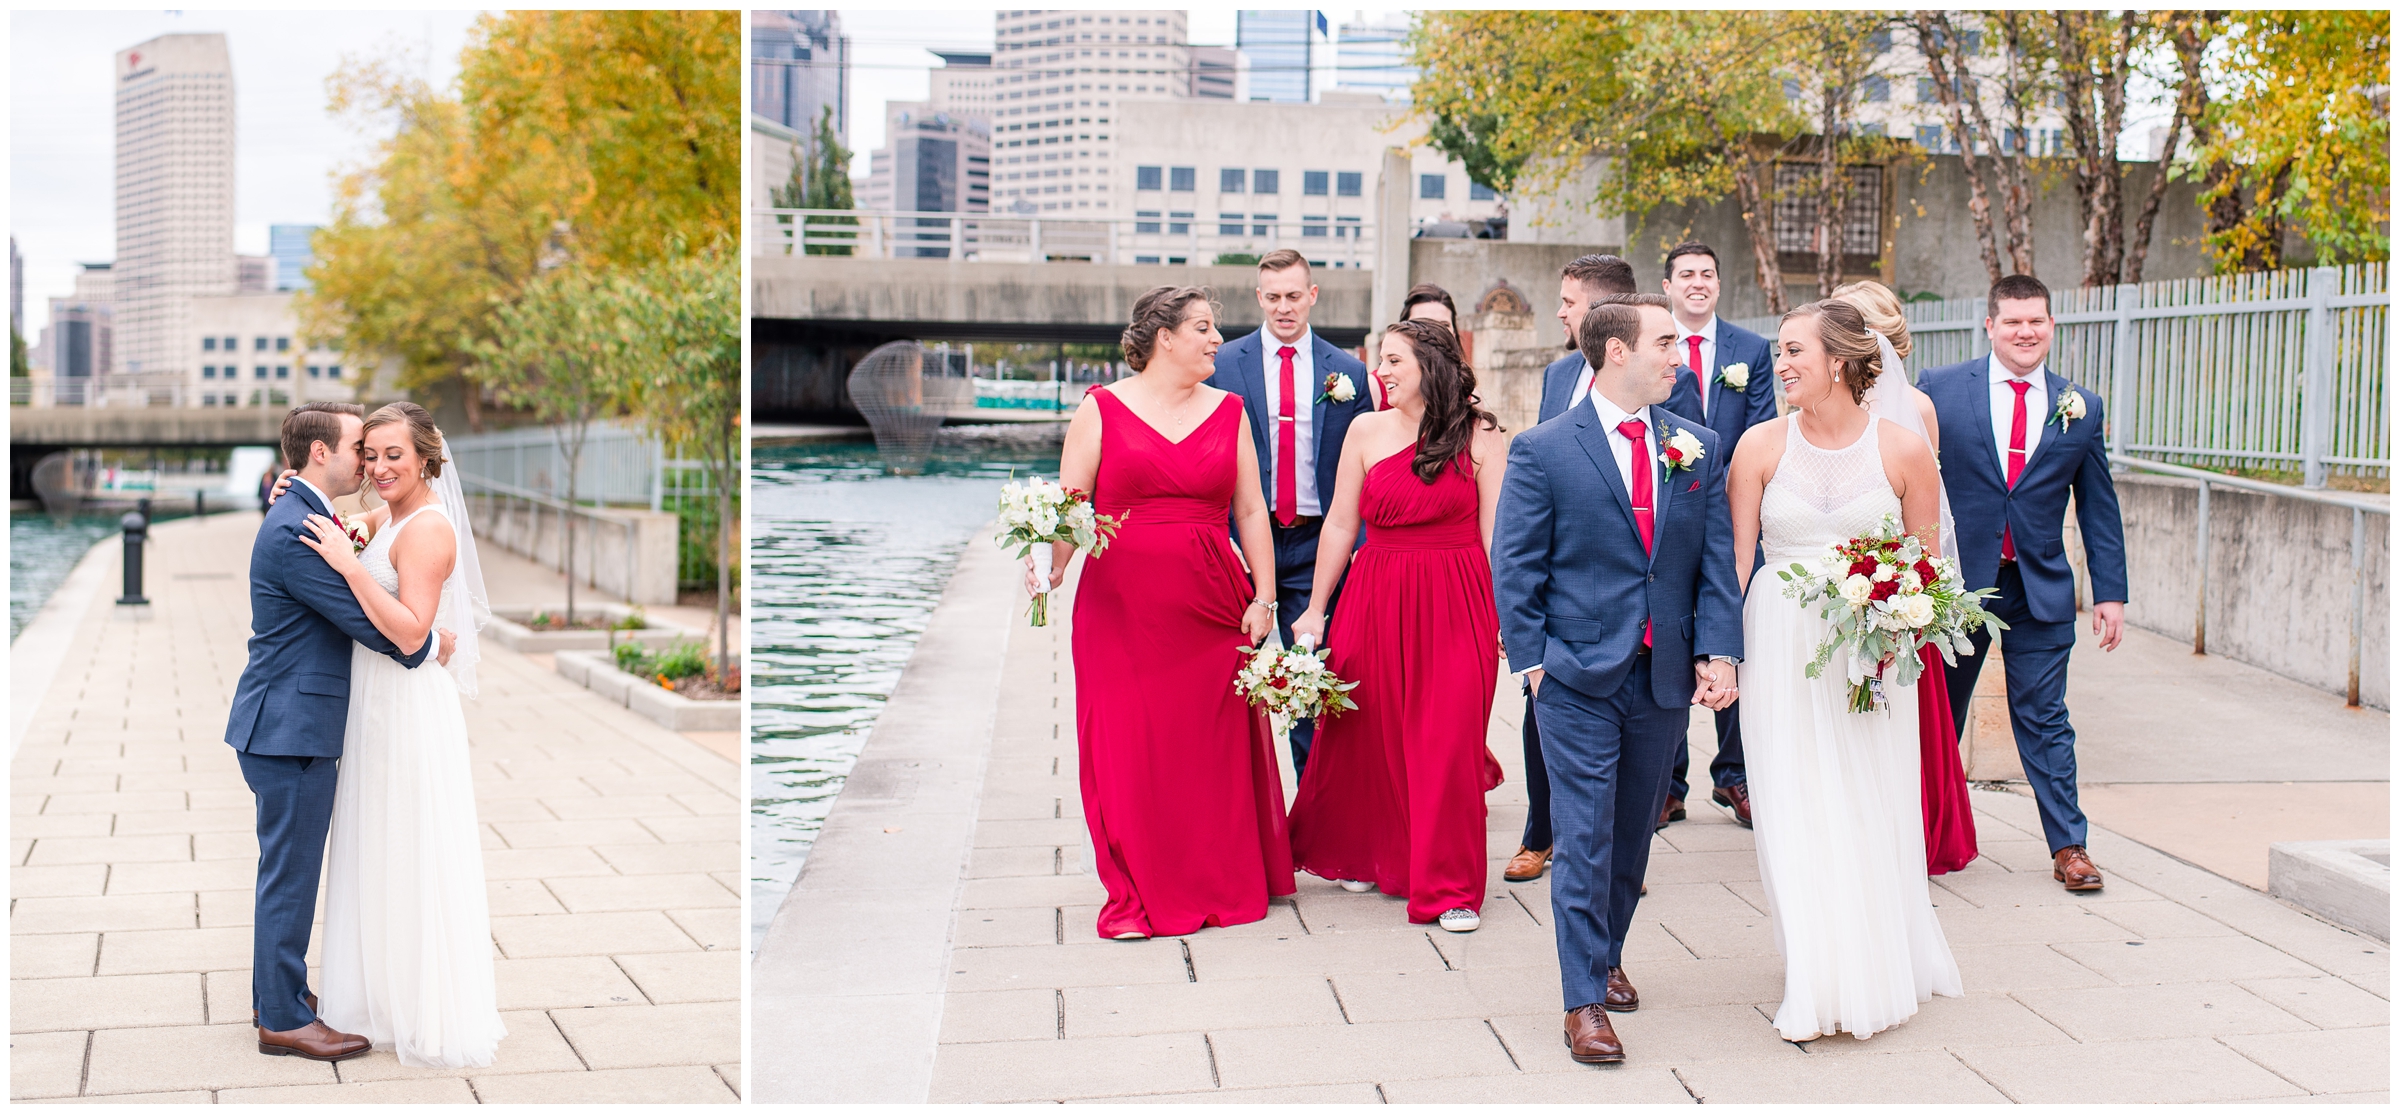 Bridal party photos on the Indianapolis Canal